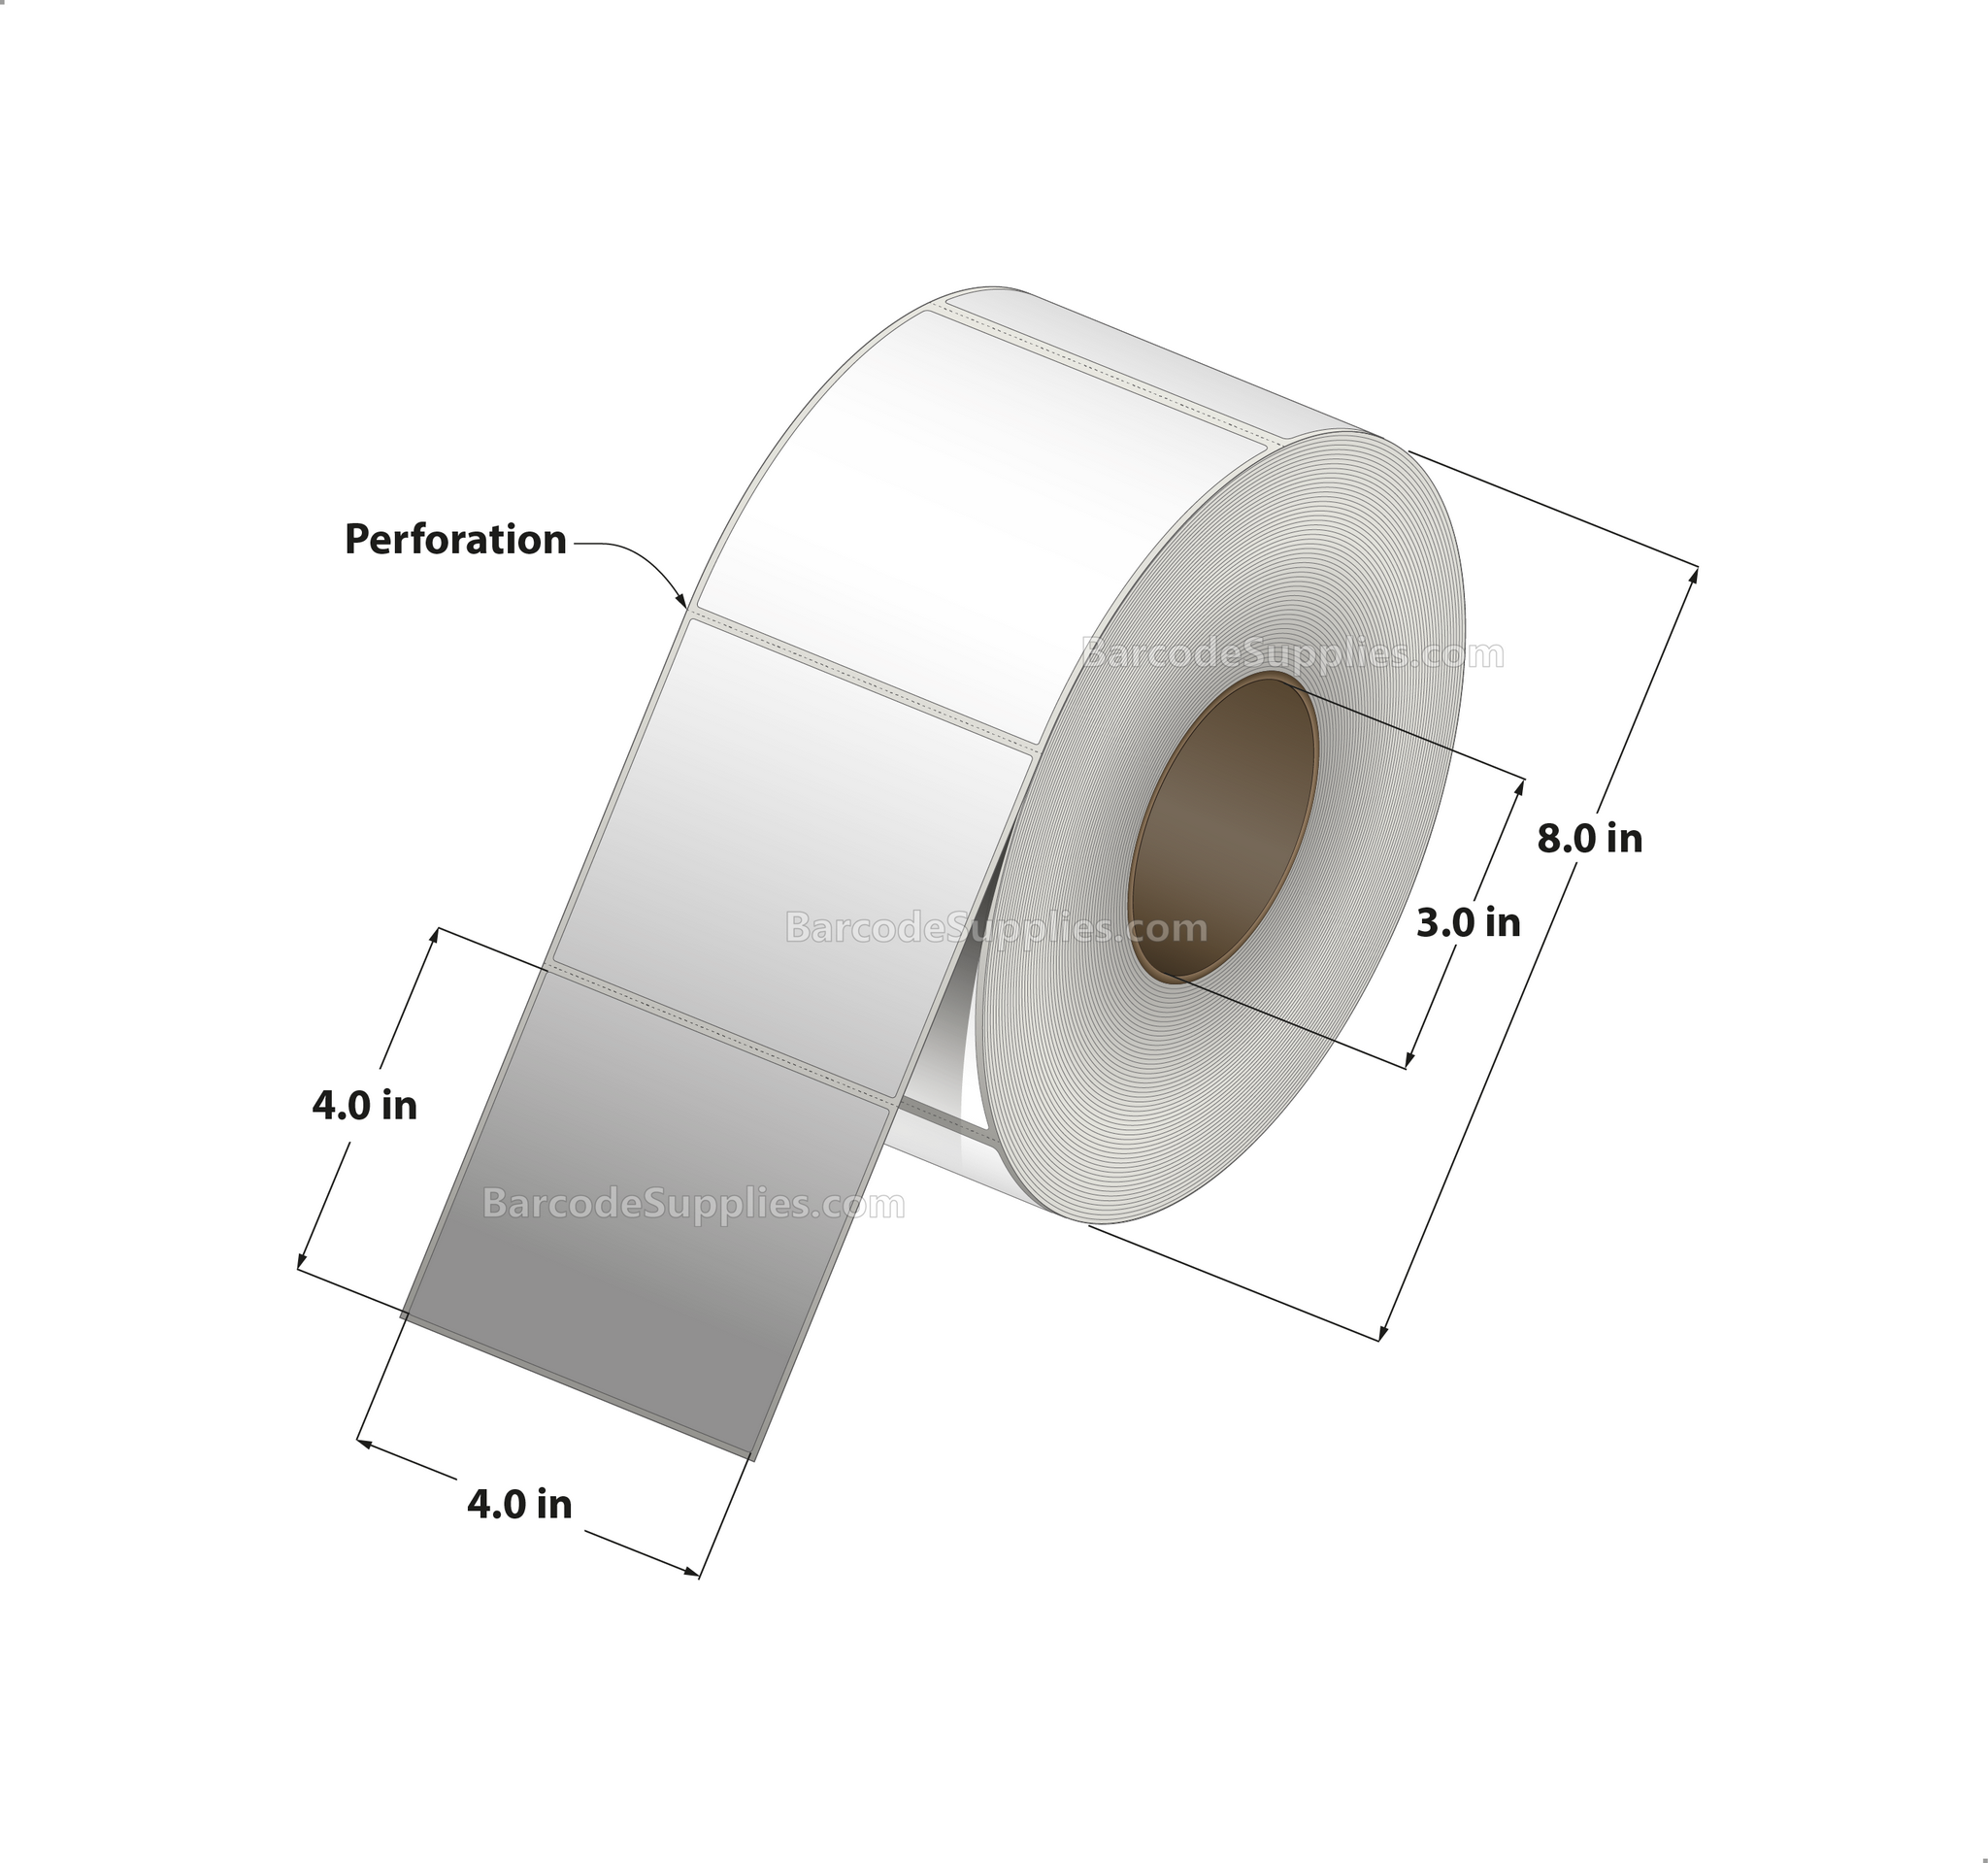 4 x 4 Thermal Transfer White Labels With Permanent Acrylic Adhesive - Perforated - 1500 Labels Per Roll - Carton Of 4 Rolls - 6000 Labels Total - MPN: TH44-1P